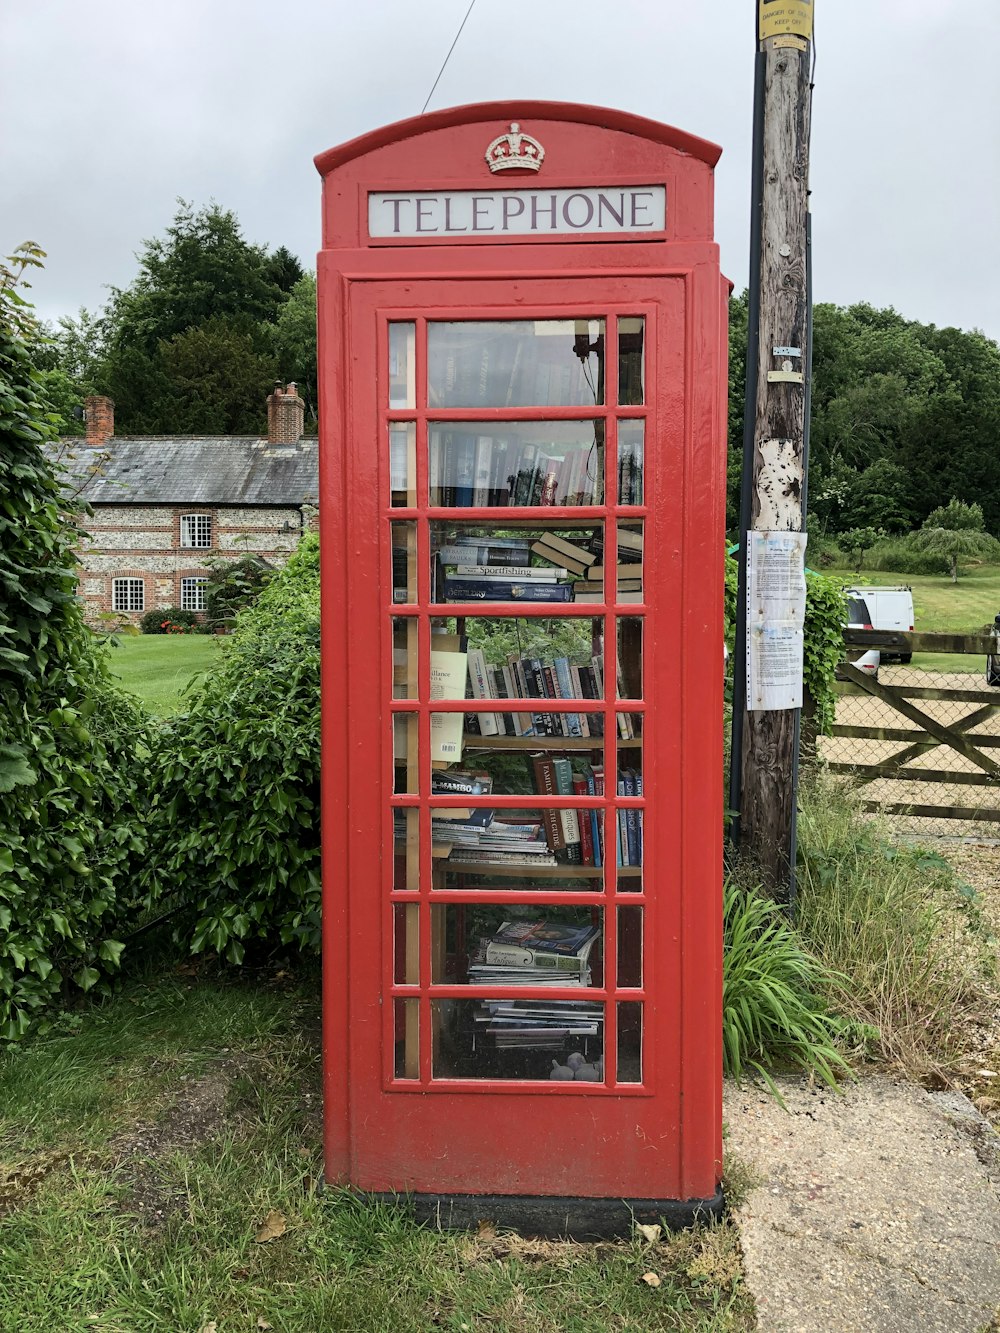 red telephone booth near green grass during daytime